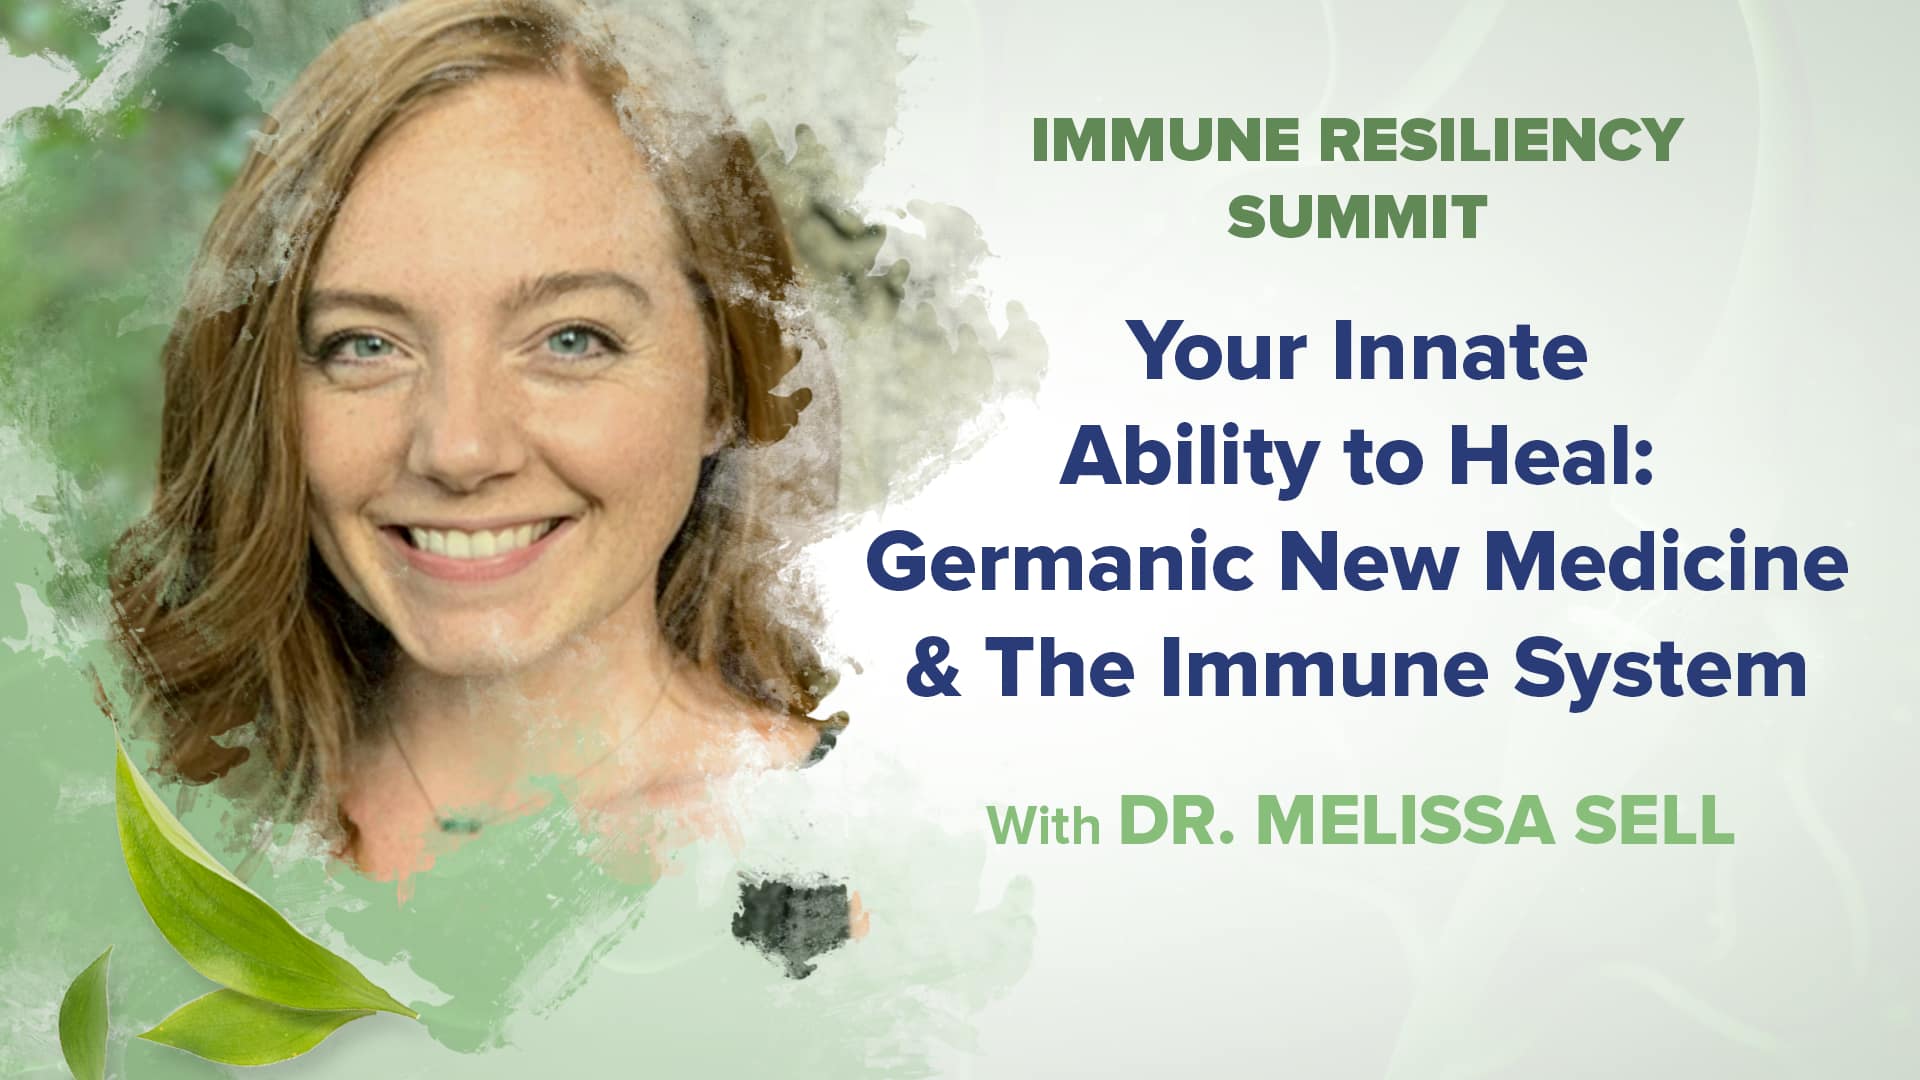 Your Innate Ability to Heal: Germanic New Medicine & The Immune System